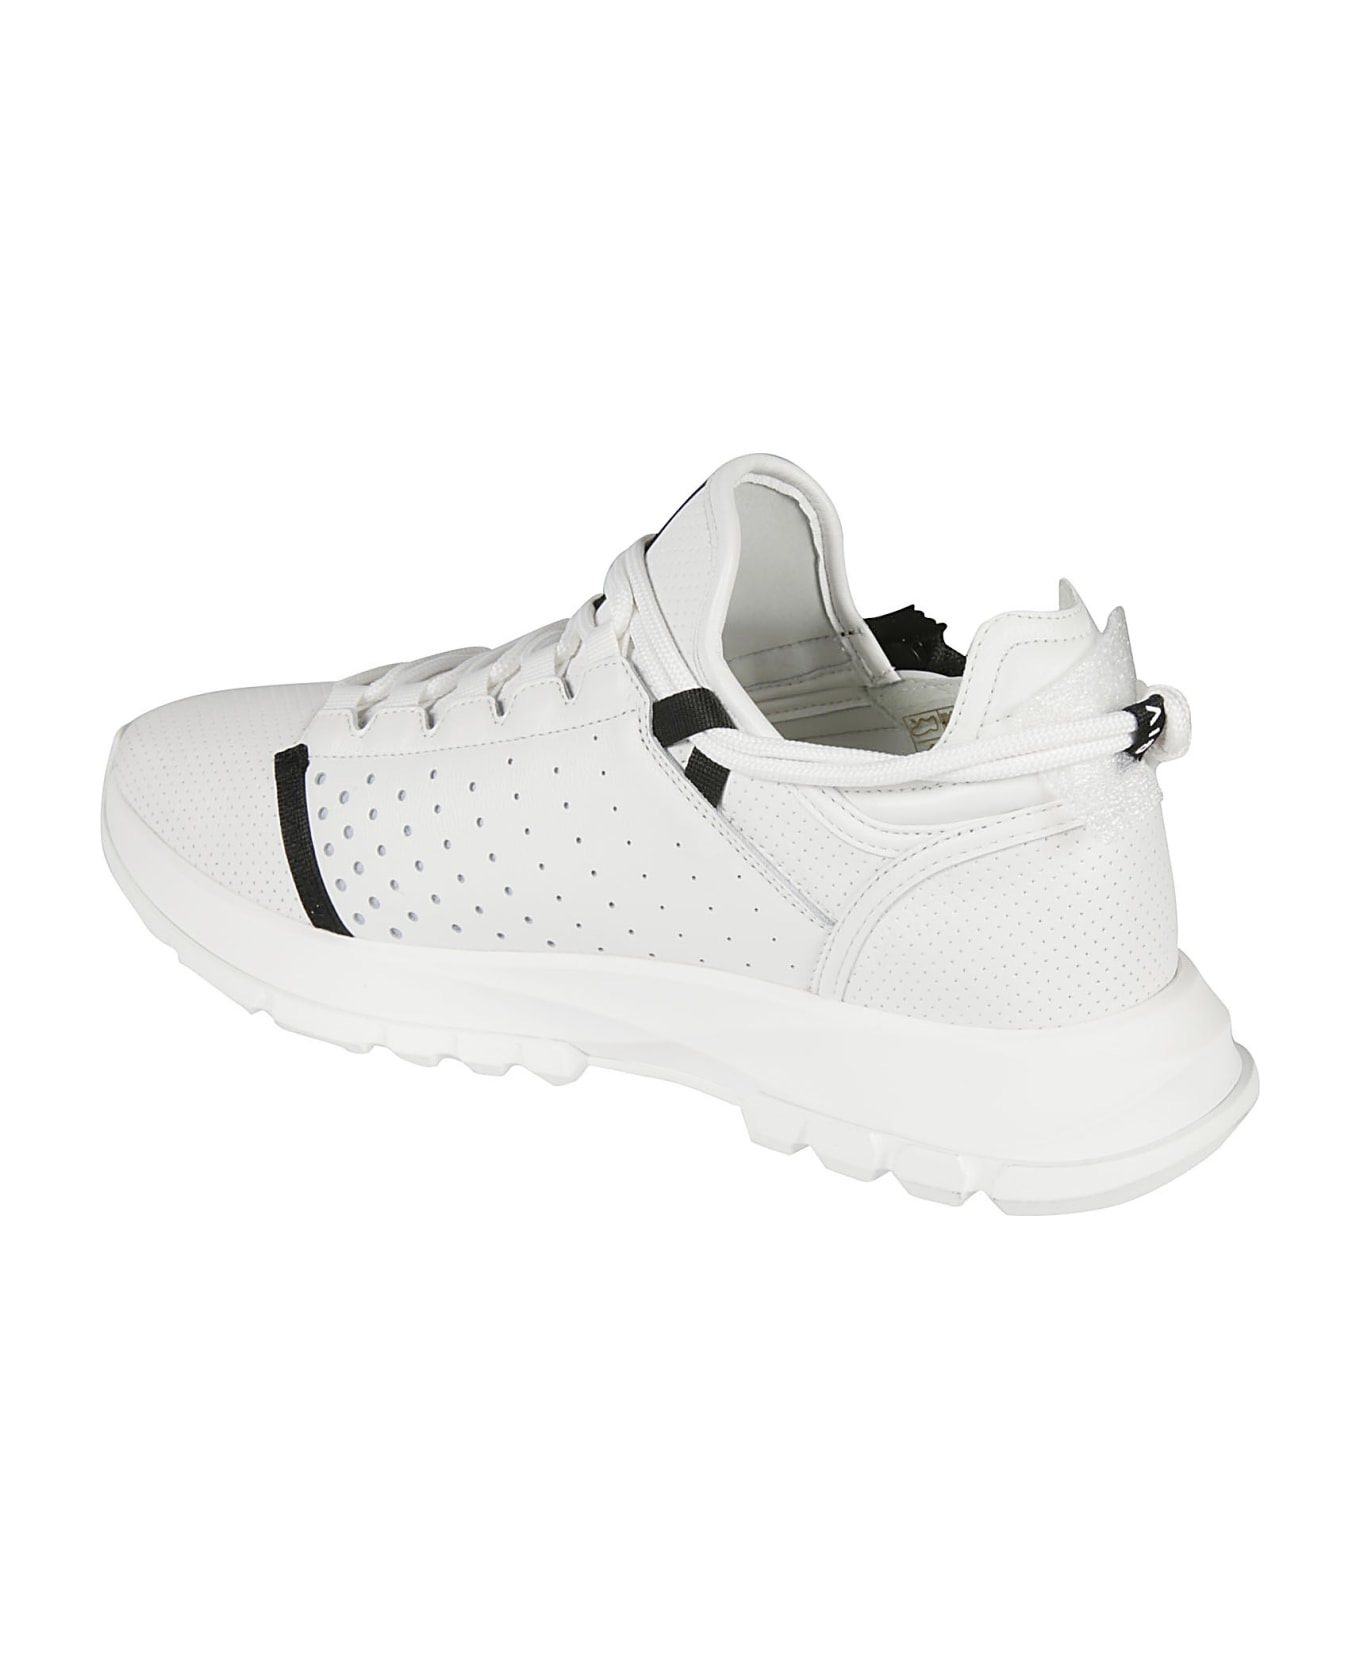 Givenchy Spectre Runner Zip Sneakers